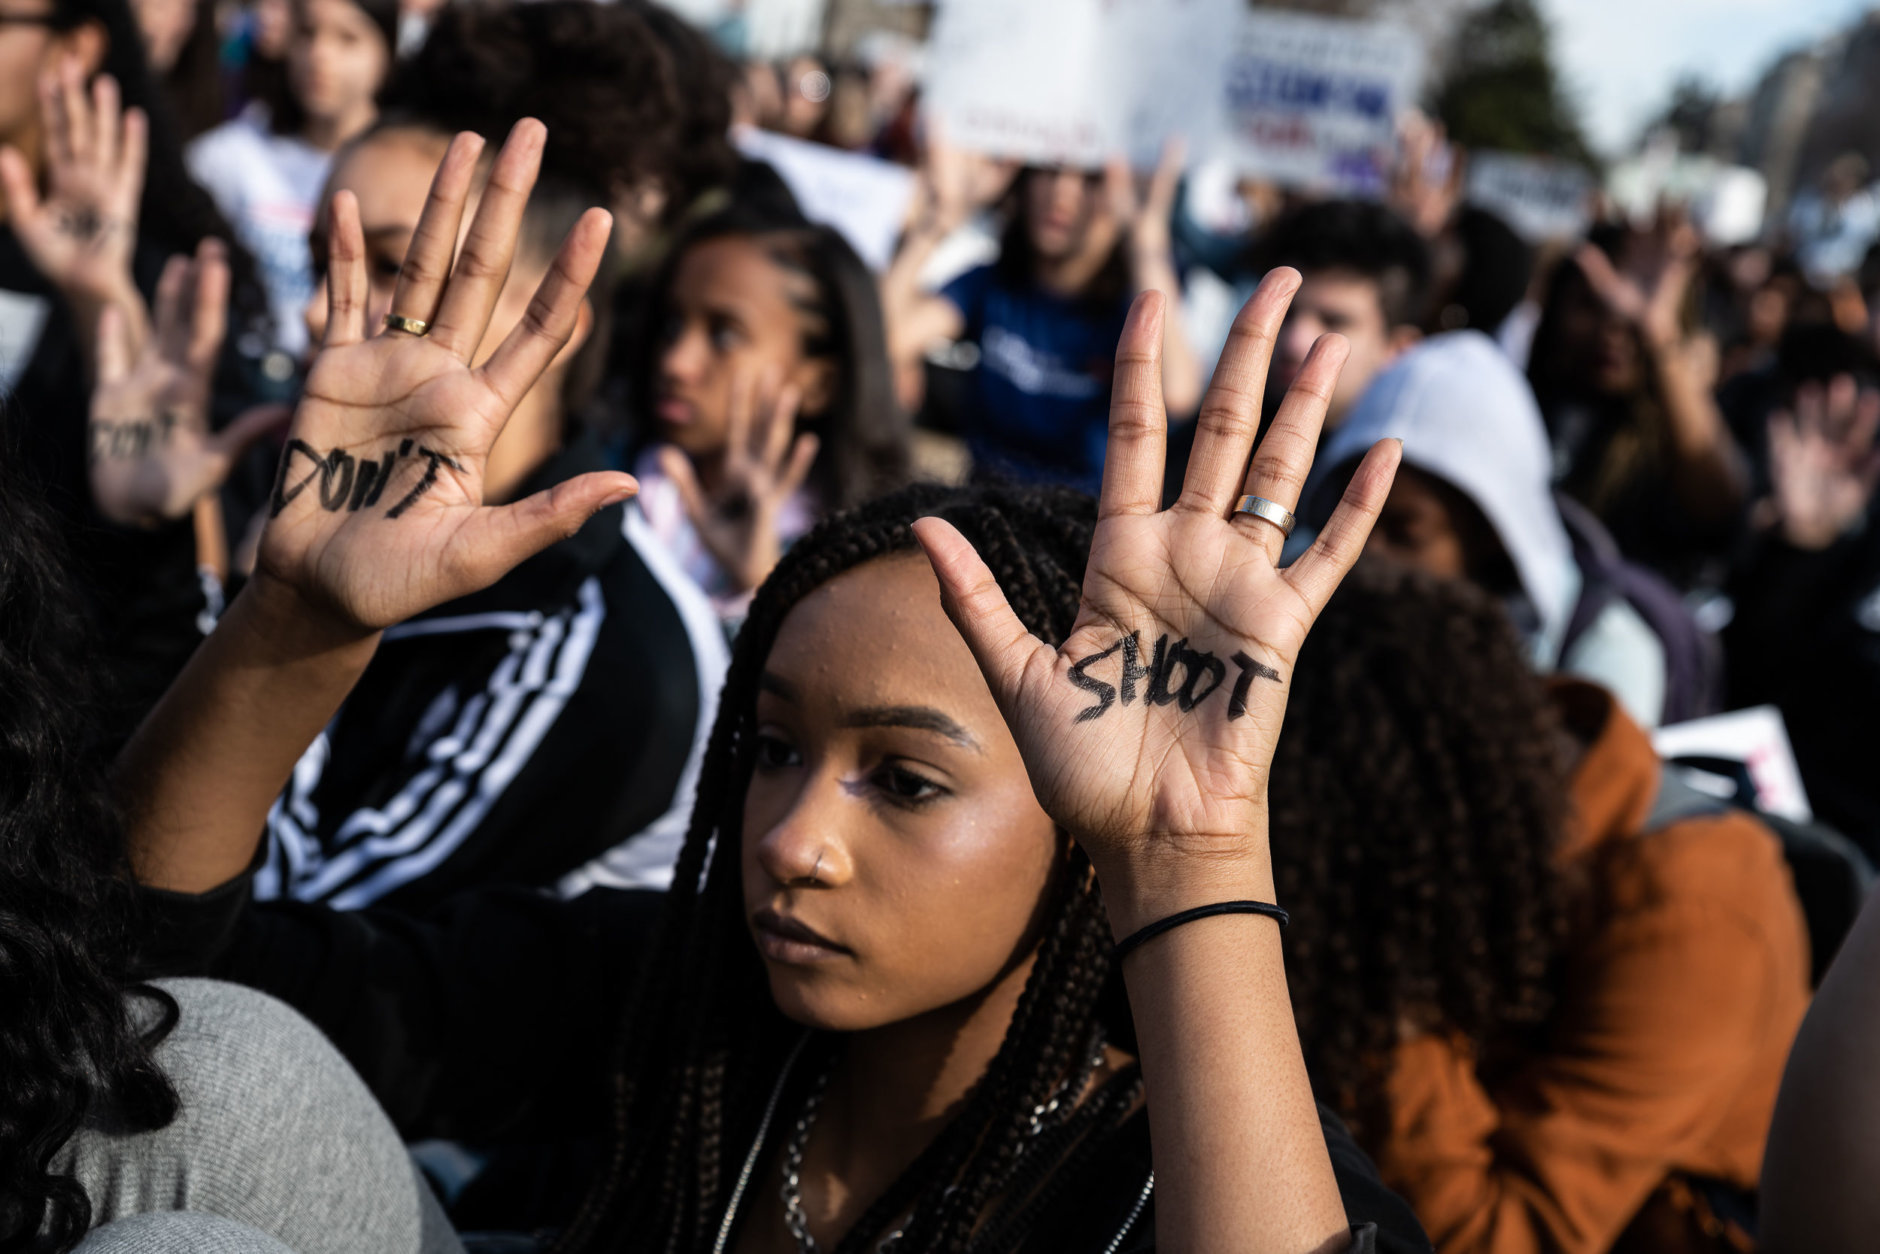 A protester sits with her hands facing the White House during a moment of silence at the student walkout against gun violence on March 14, 2019. (WTOP/Alejandro Alvarez)